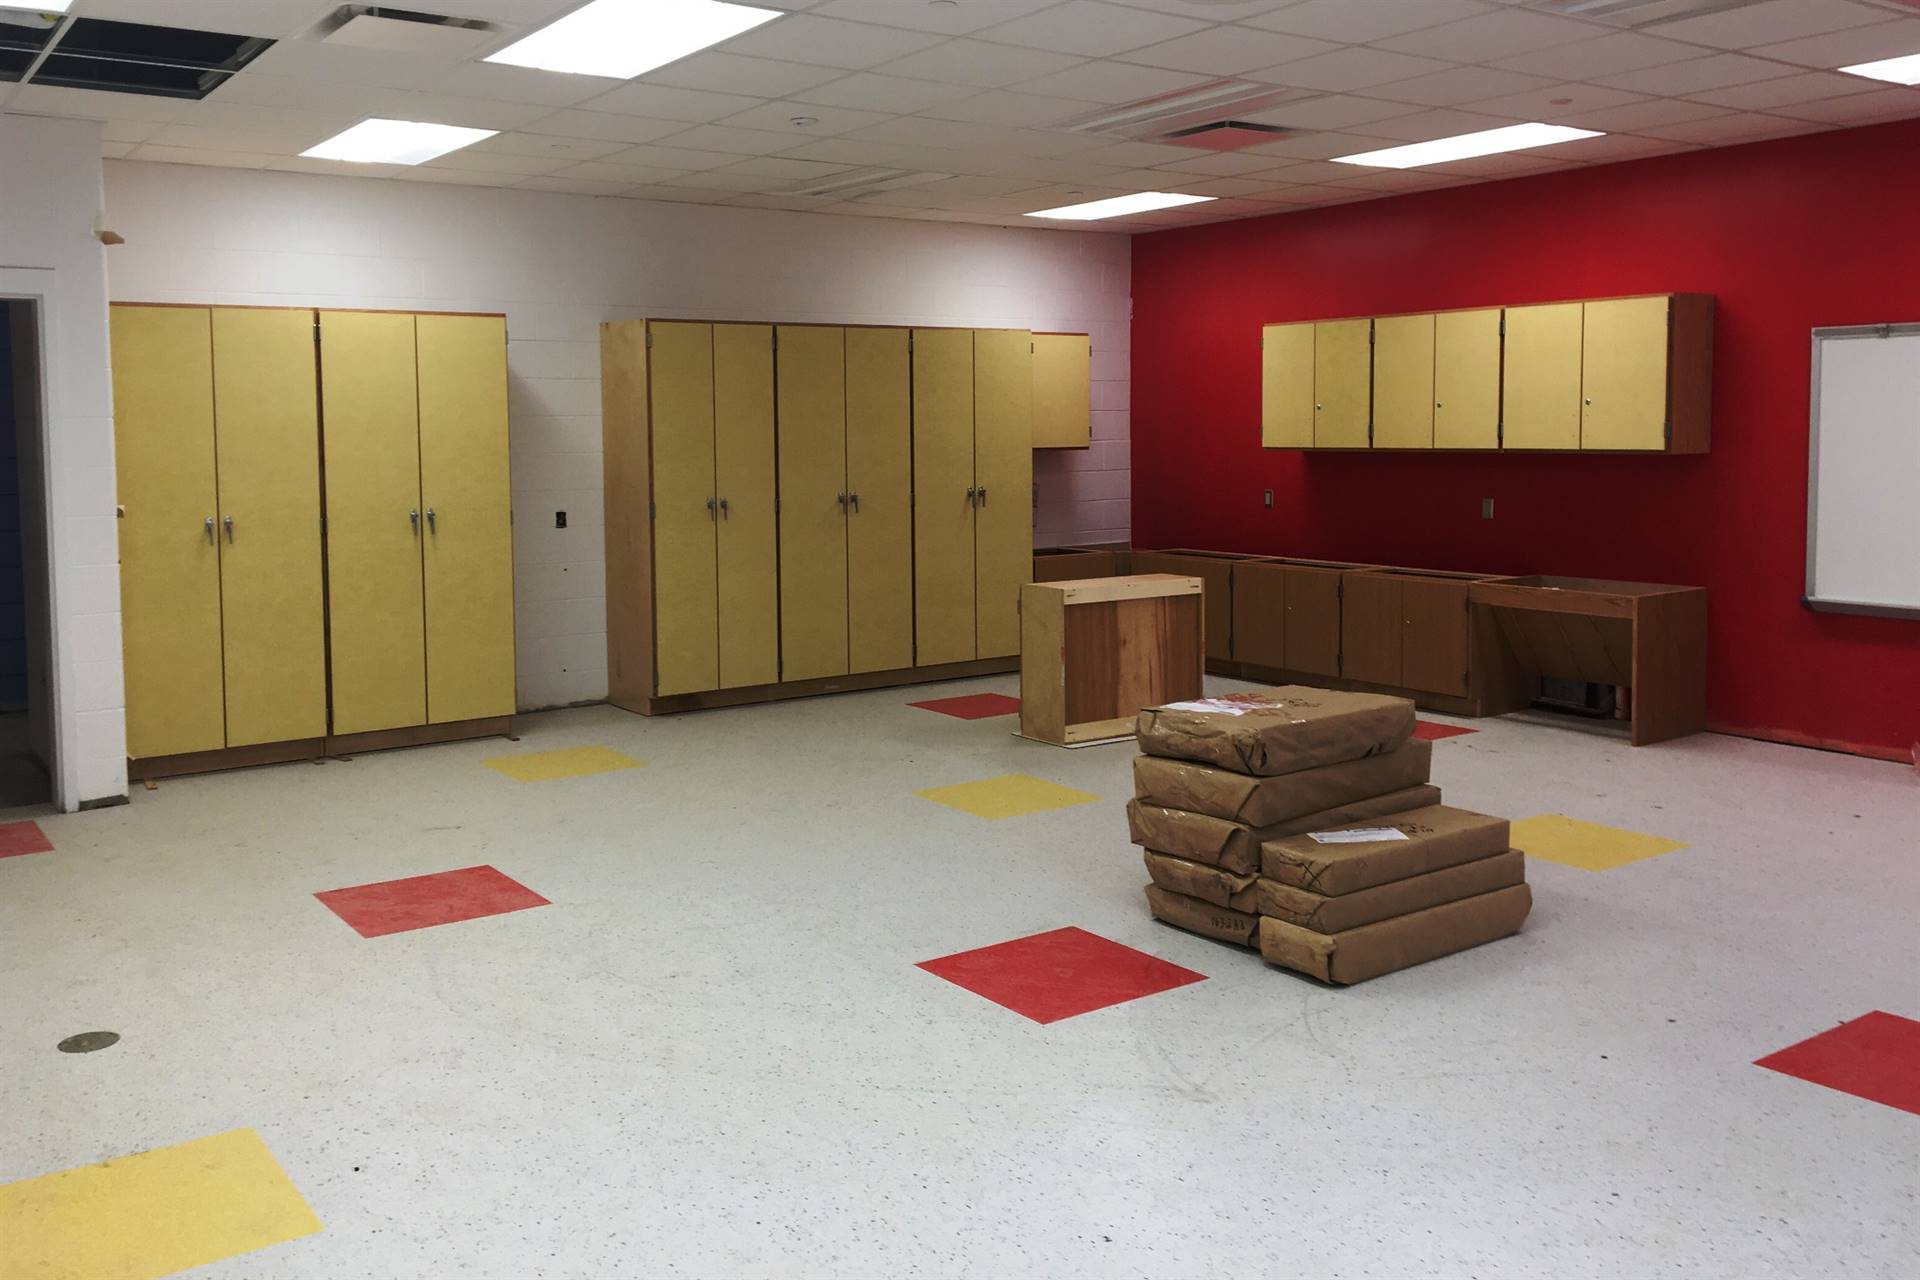 Classroom with cabinets